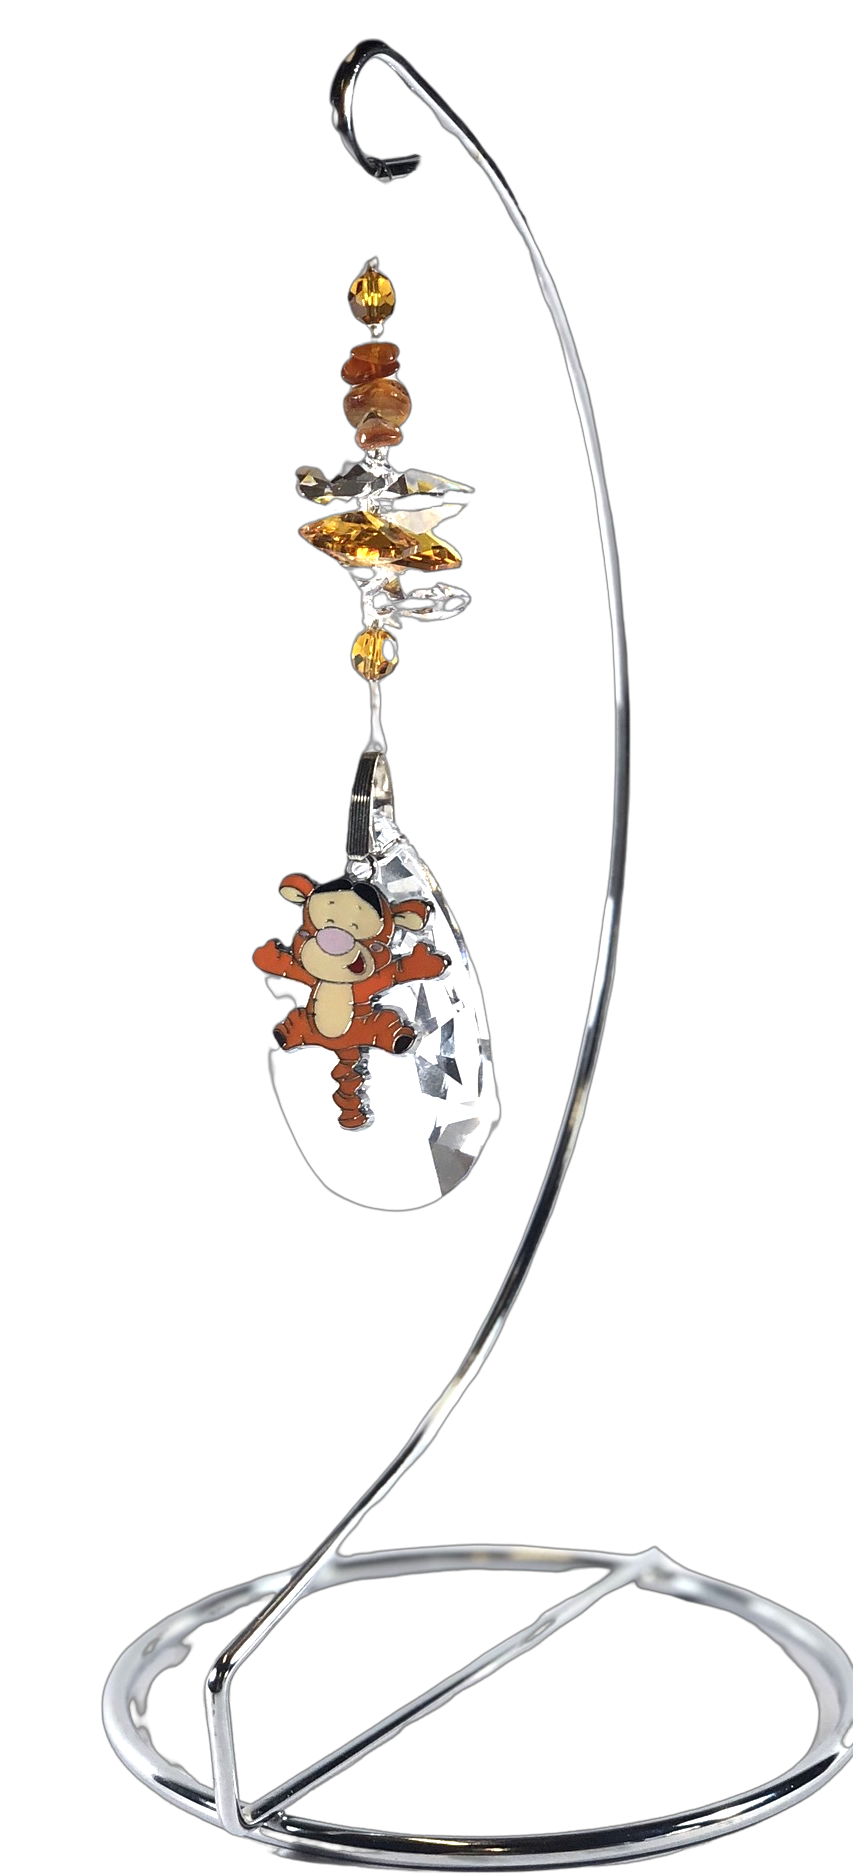 Winnie The Pooh - Tigger suncatcher is decorated with carnelian and come on this amazing stand.